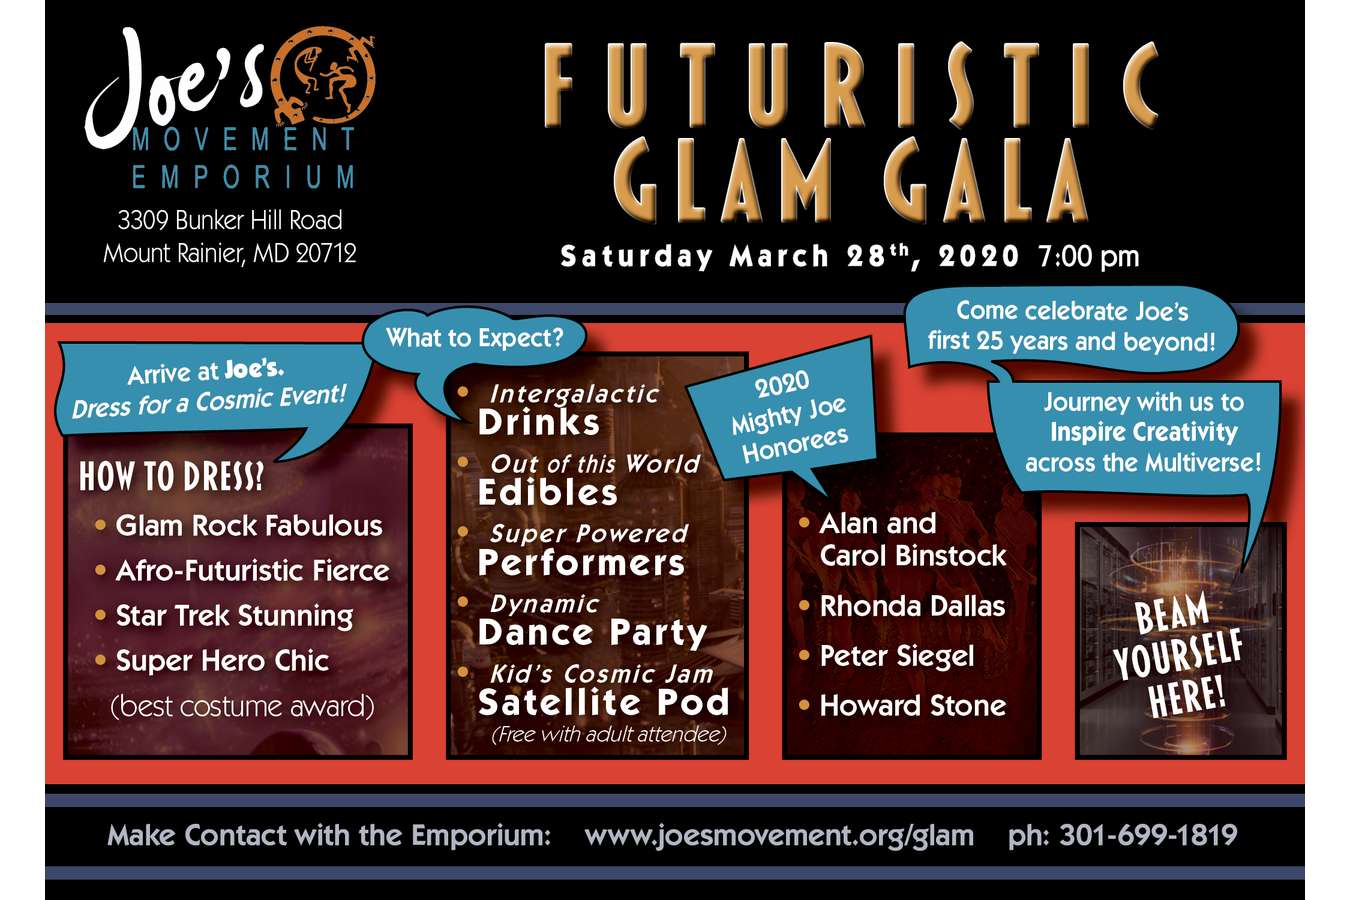 2 J25 FFG : Joe's Movement Emporium Save the Date Postcard – prepping guests for this Multiverse event! (Side 2)